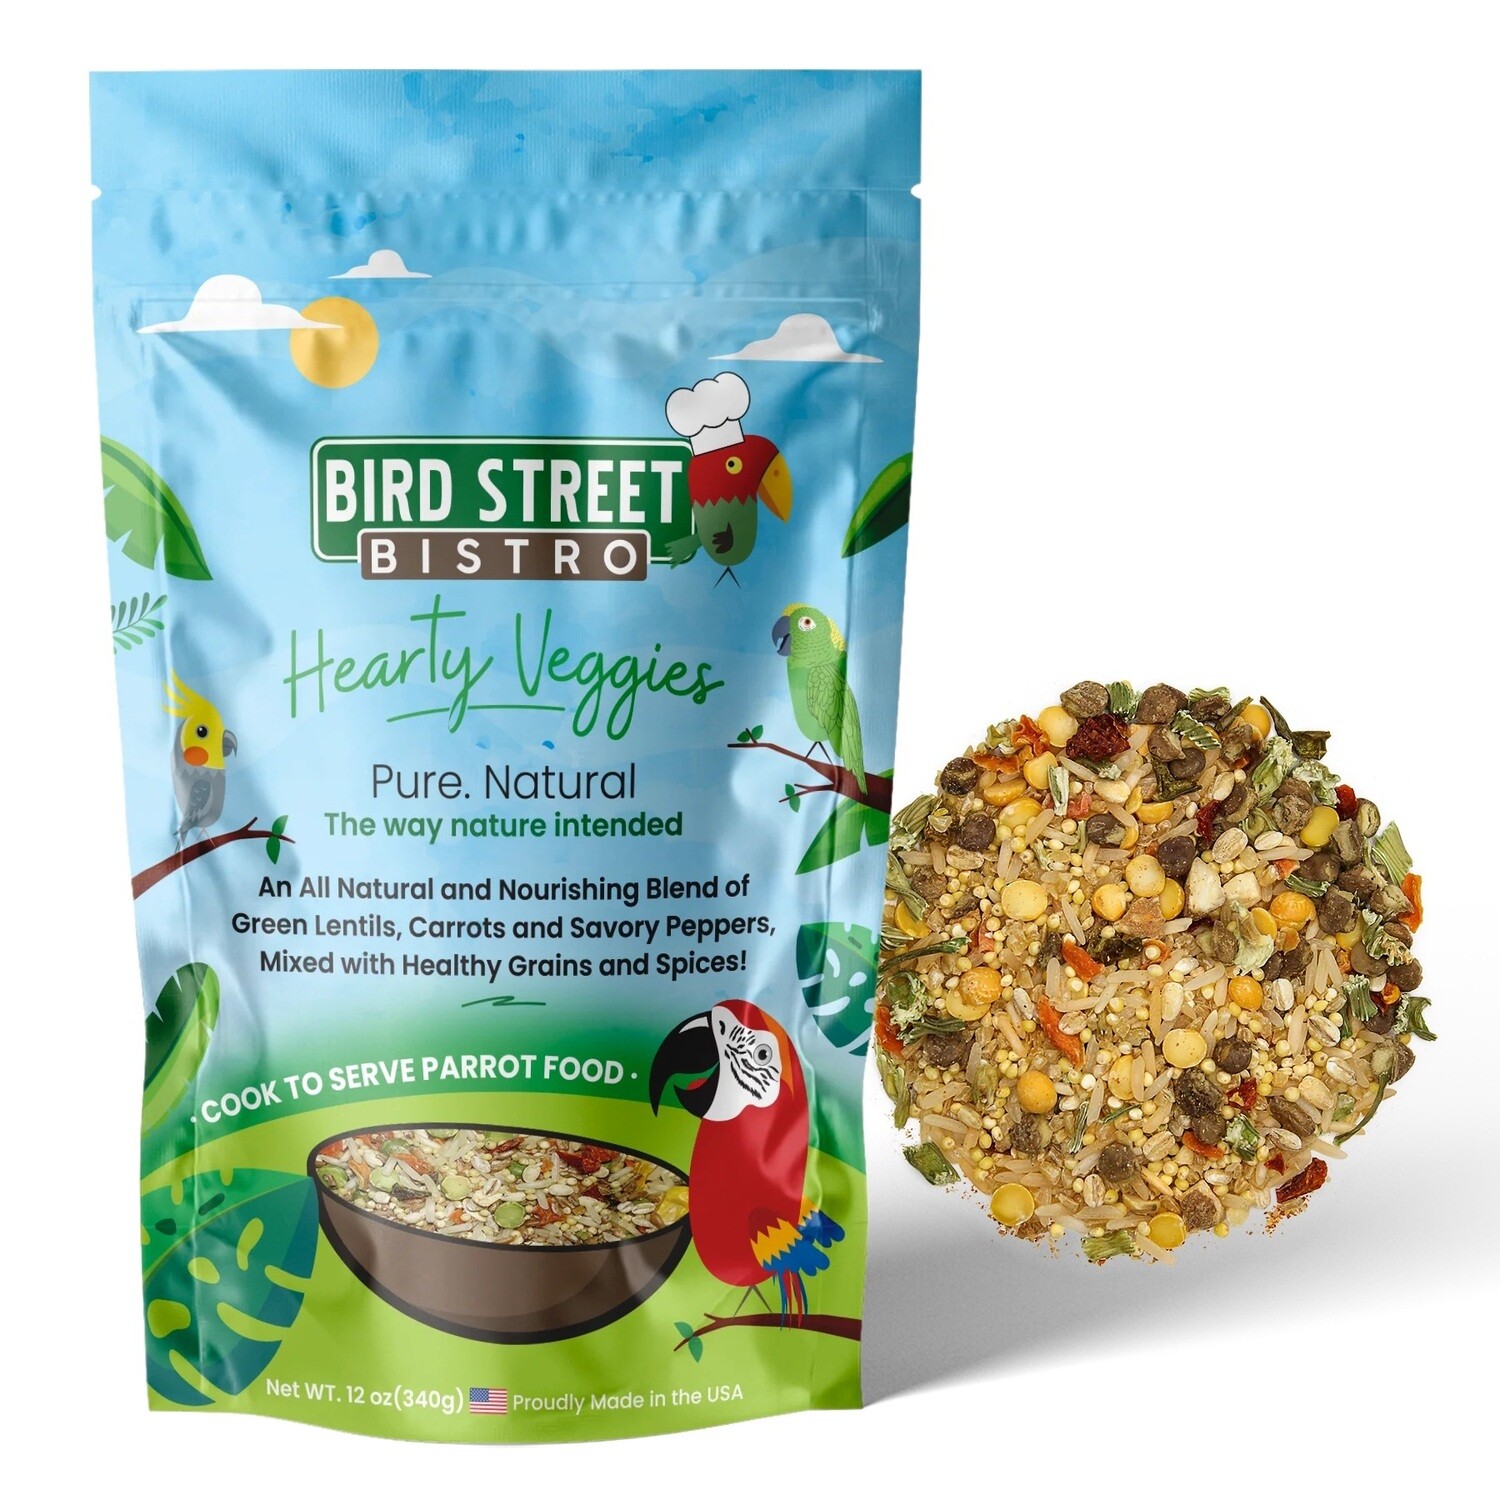 Hearty Veggies - A balanced and healthy blend of nutritious grains, all natural vegetables and delicious fruits, seasoned with healthy spices! - 12 oz